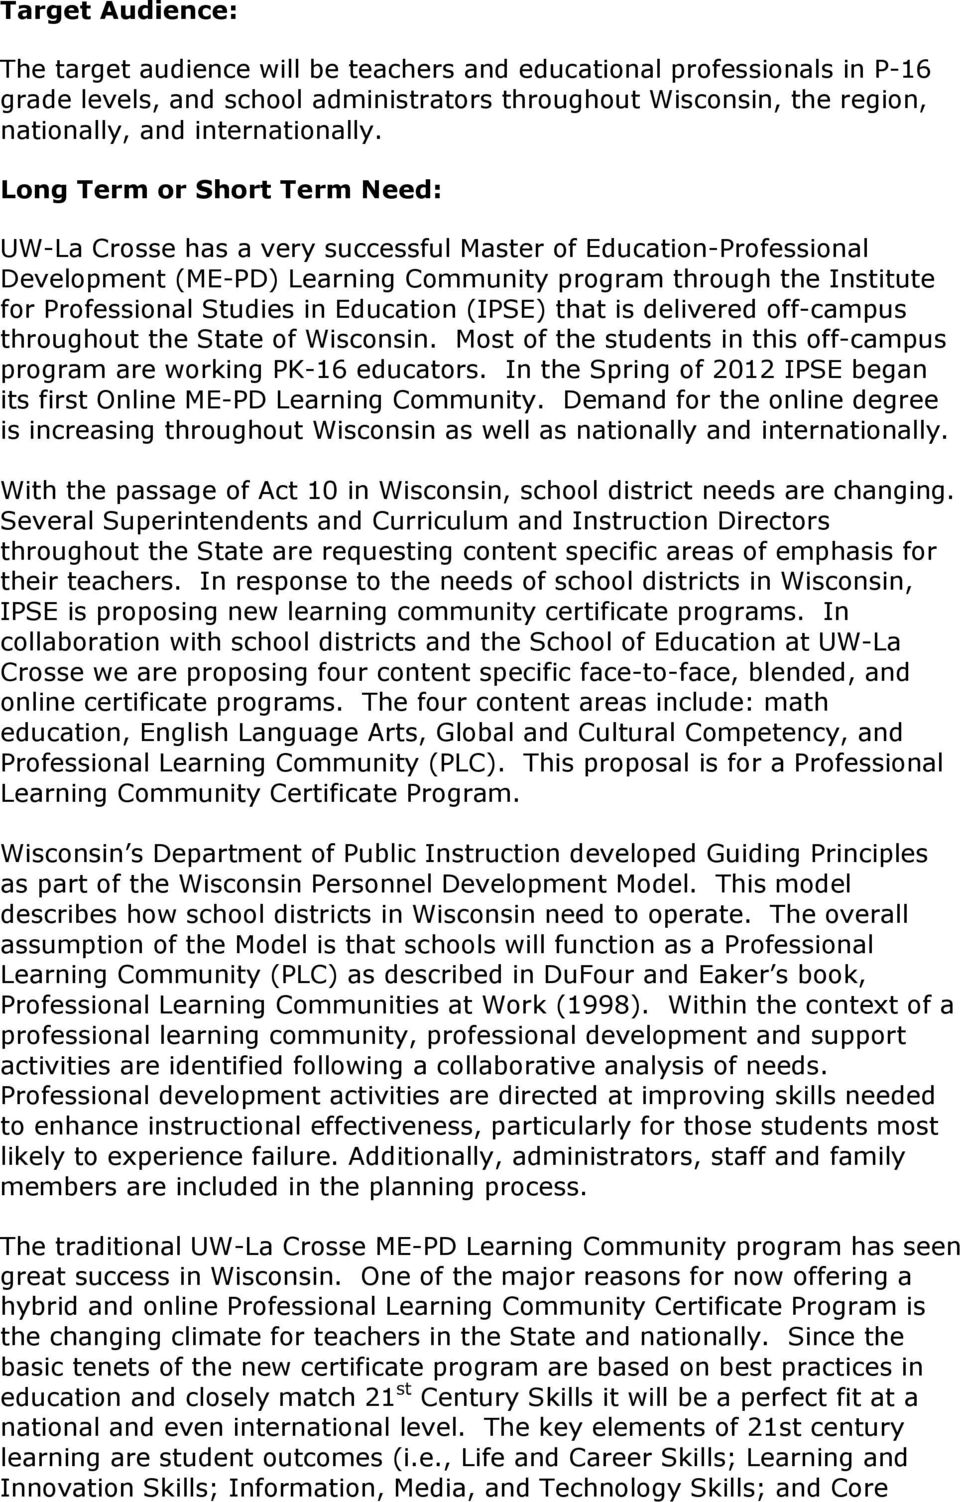 Education (IPSE) that is delivered off-campus throughout the State of Wisconsin. Most of the students in this off-campus program are working PK-16 educators.